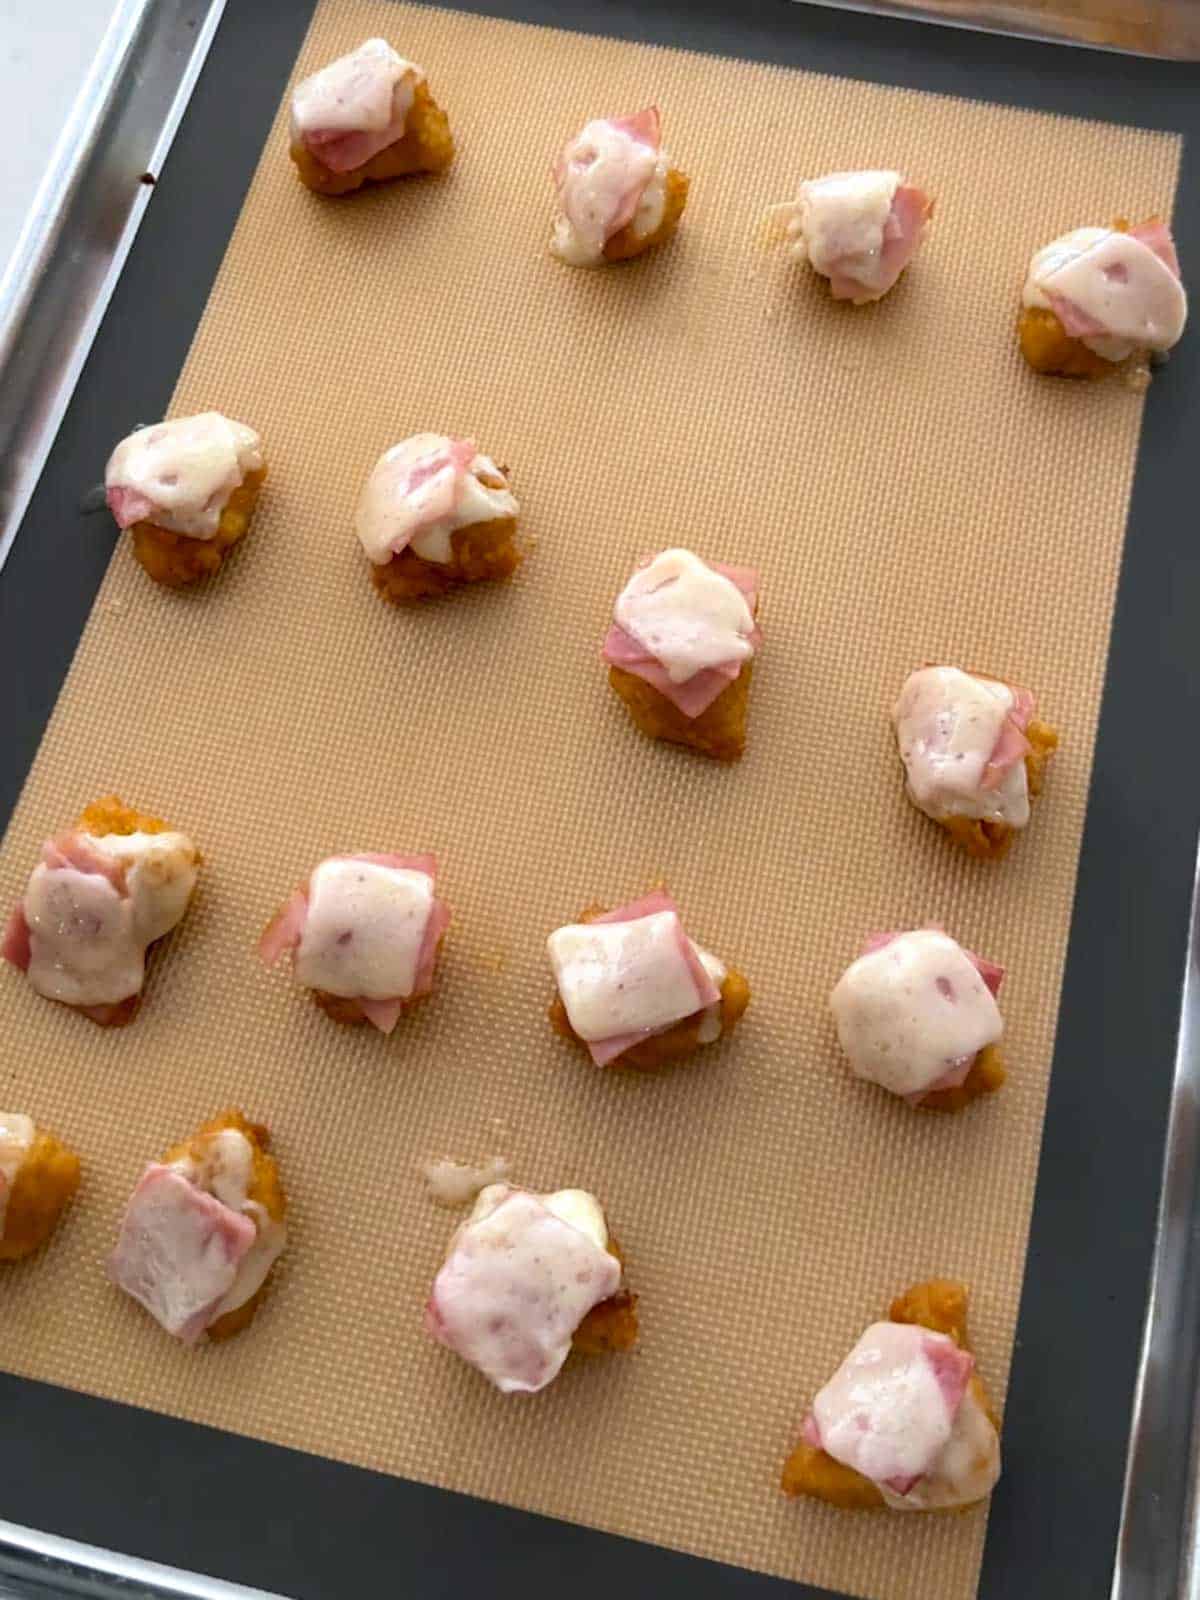 Ham and cheese baked on the chicken nuggets.